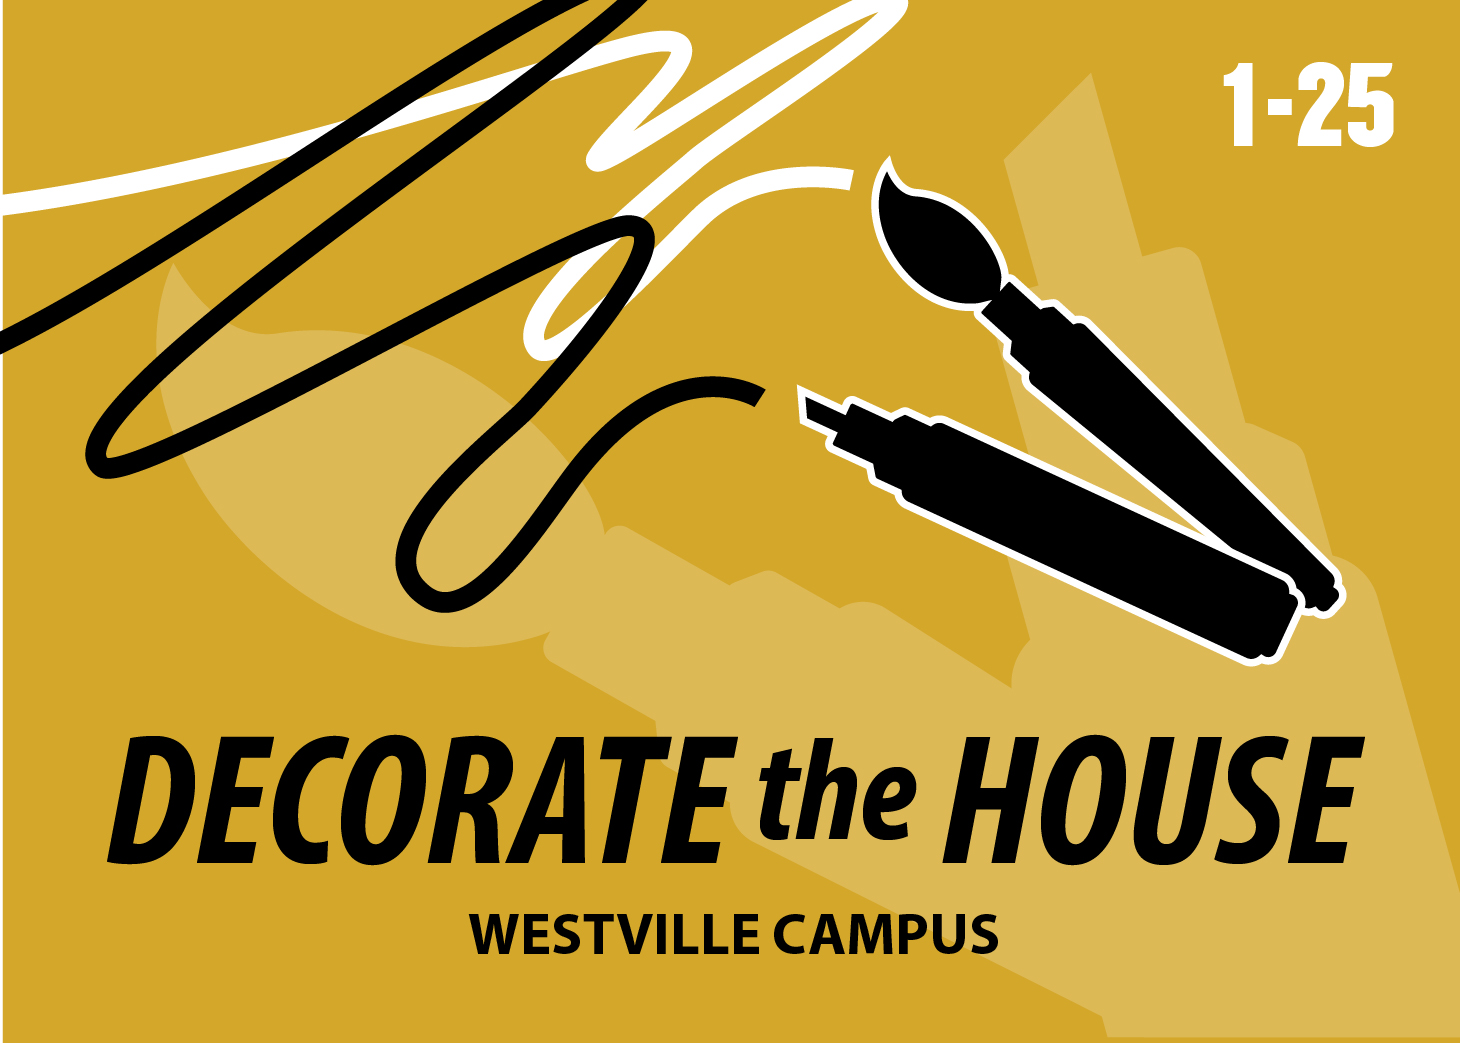 Graphic: A black graphic of a paint brush and marker drawing white and black lines on a gold background. There is a larger light gold version of the paint brush and marker on the background. Text at the bottom reads "Decorate the House Westville Campus".